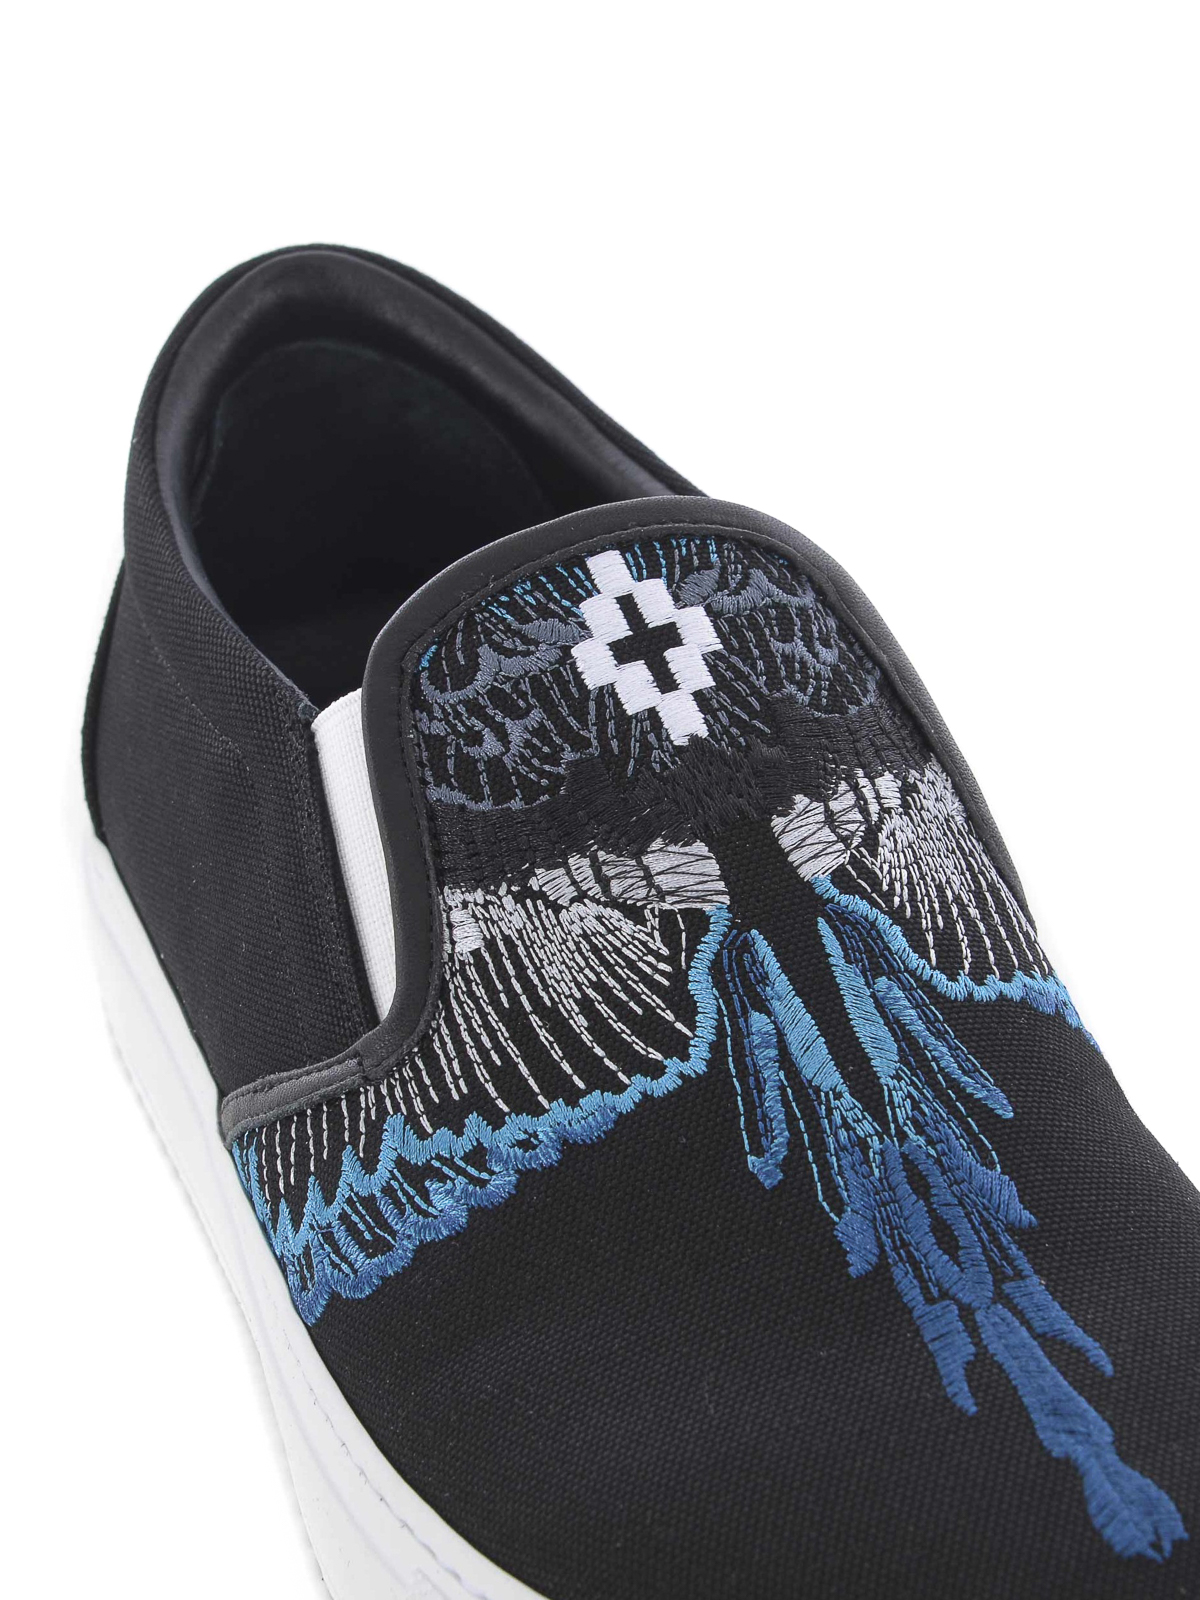 embroidered slip on shoes